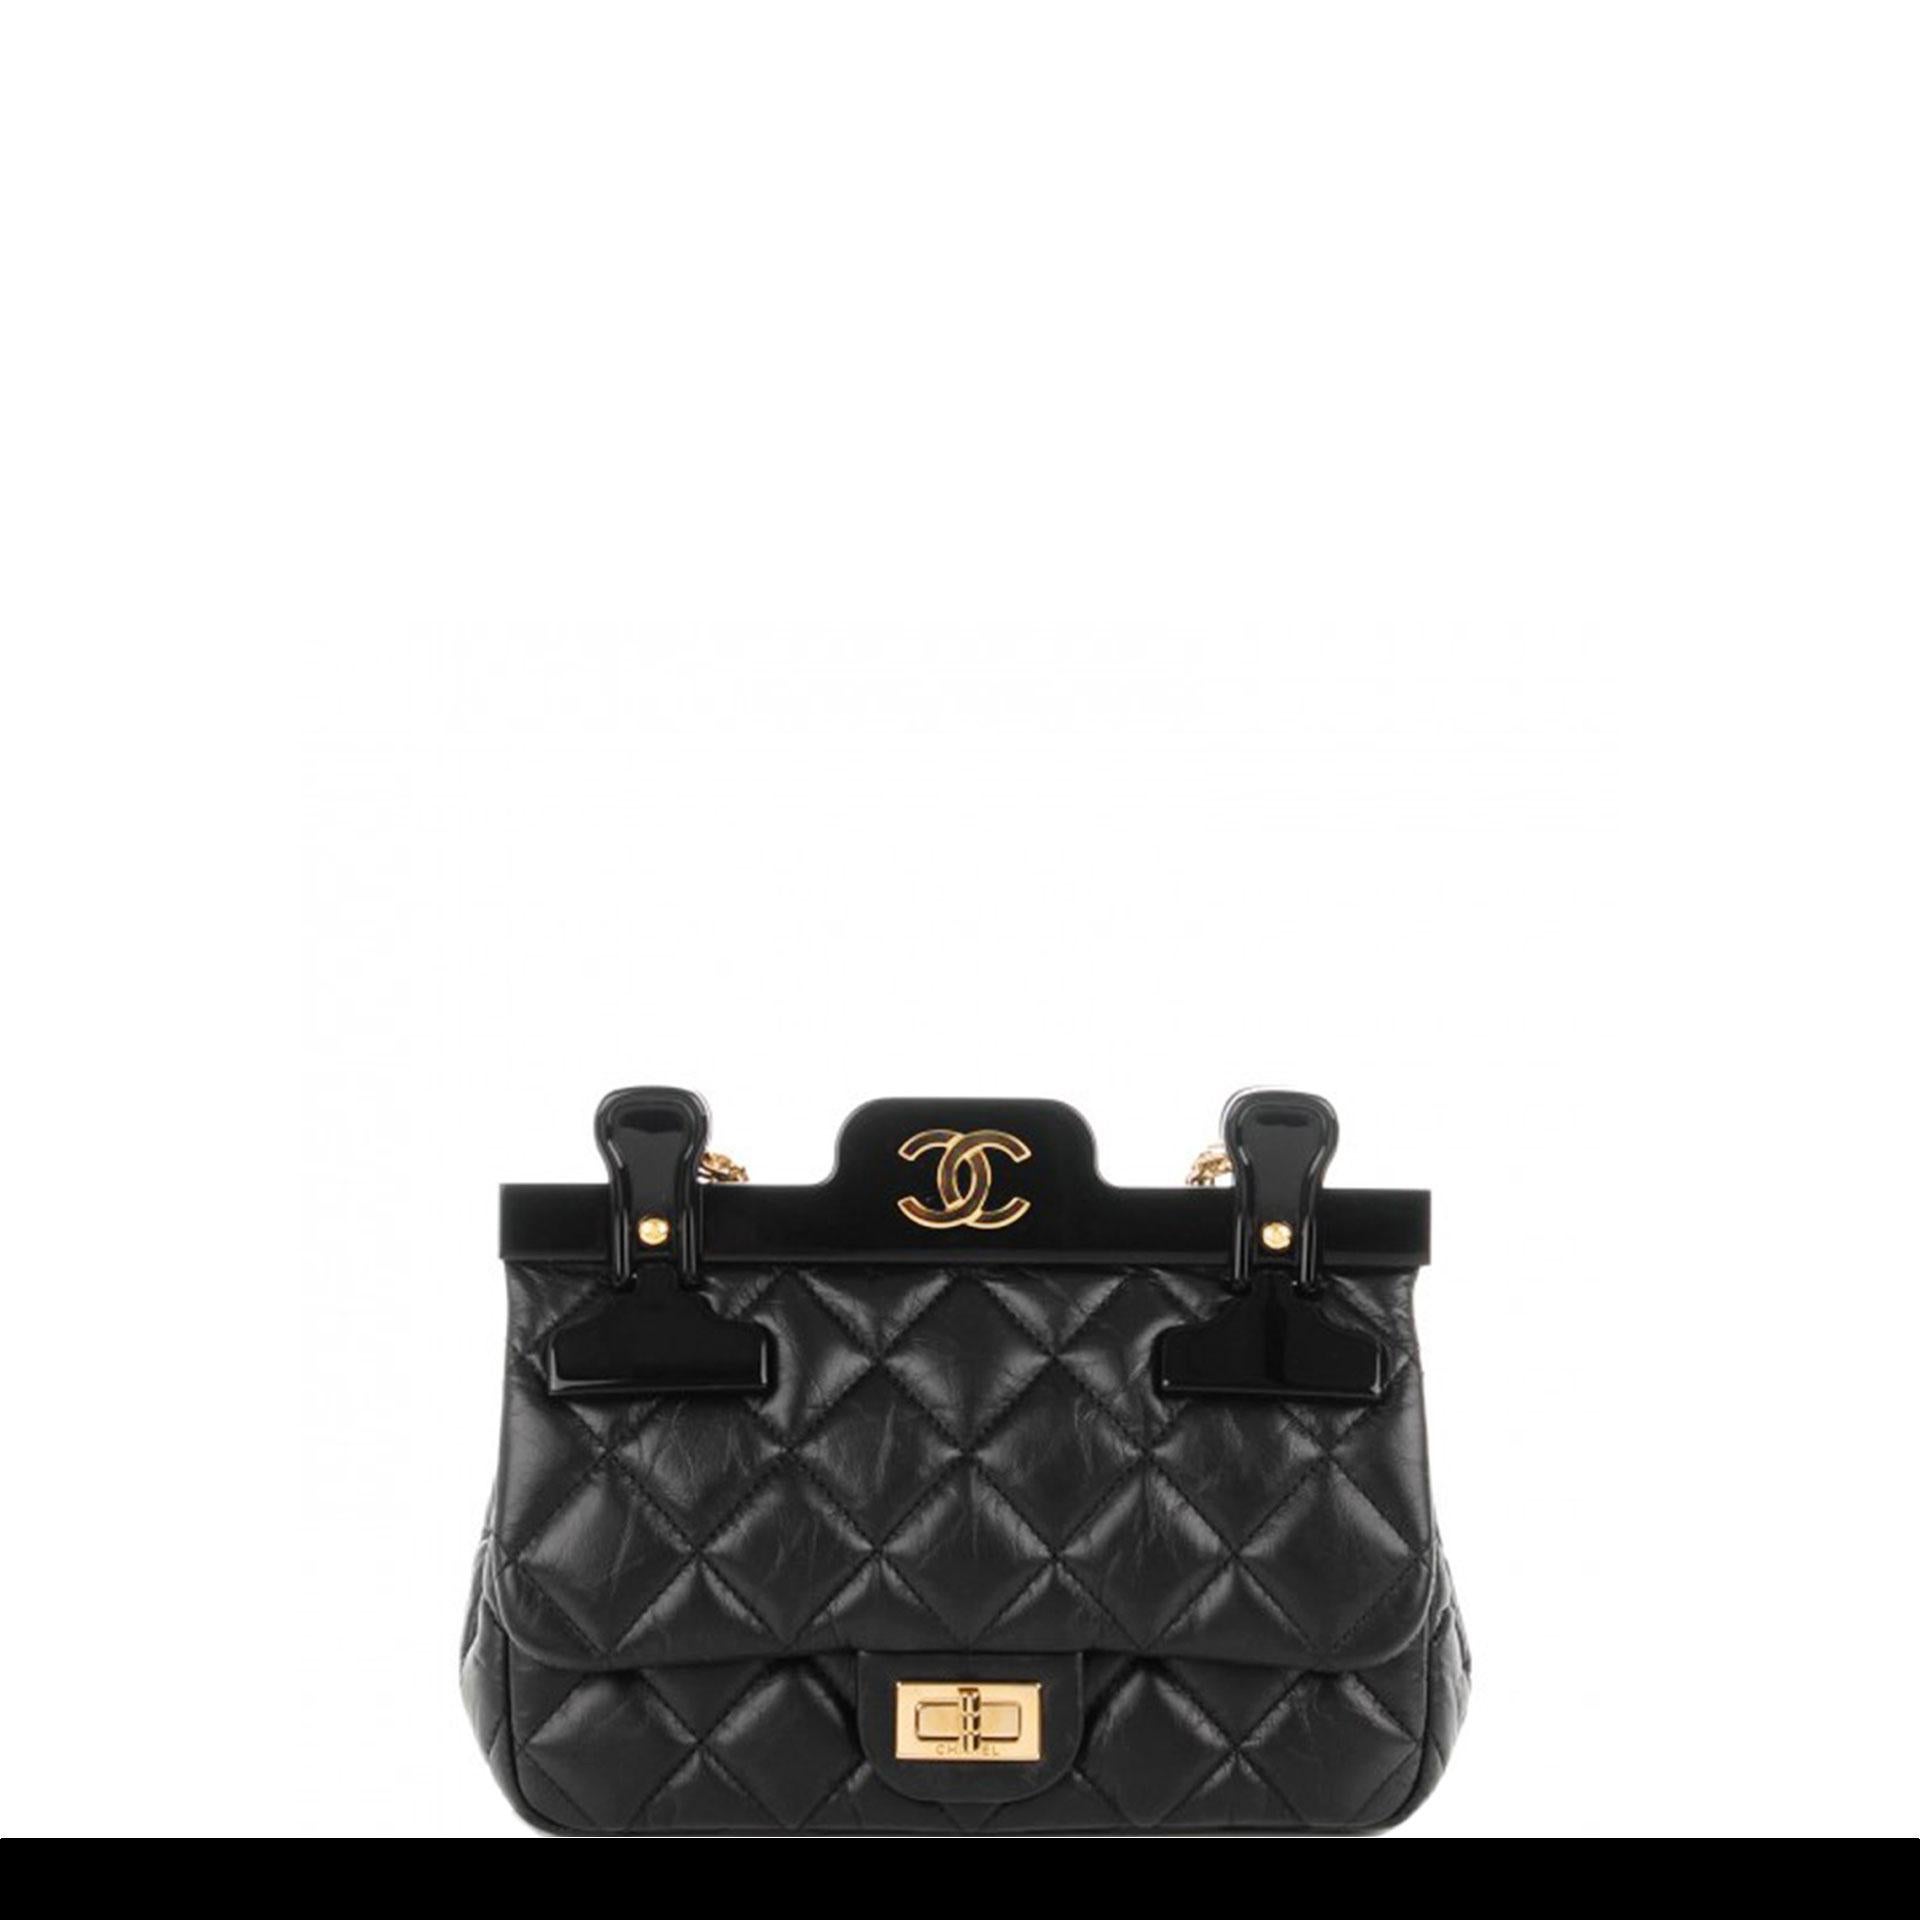 Black Chanel 2016 2.55 Reissue Flap Hanger Small Mini Reissue Limited Edition Bag For Sale